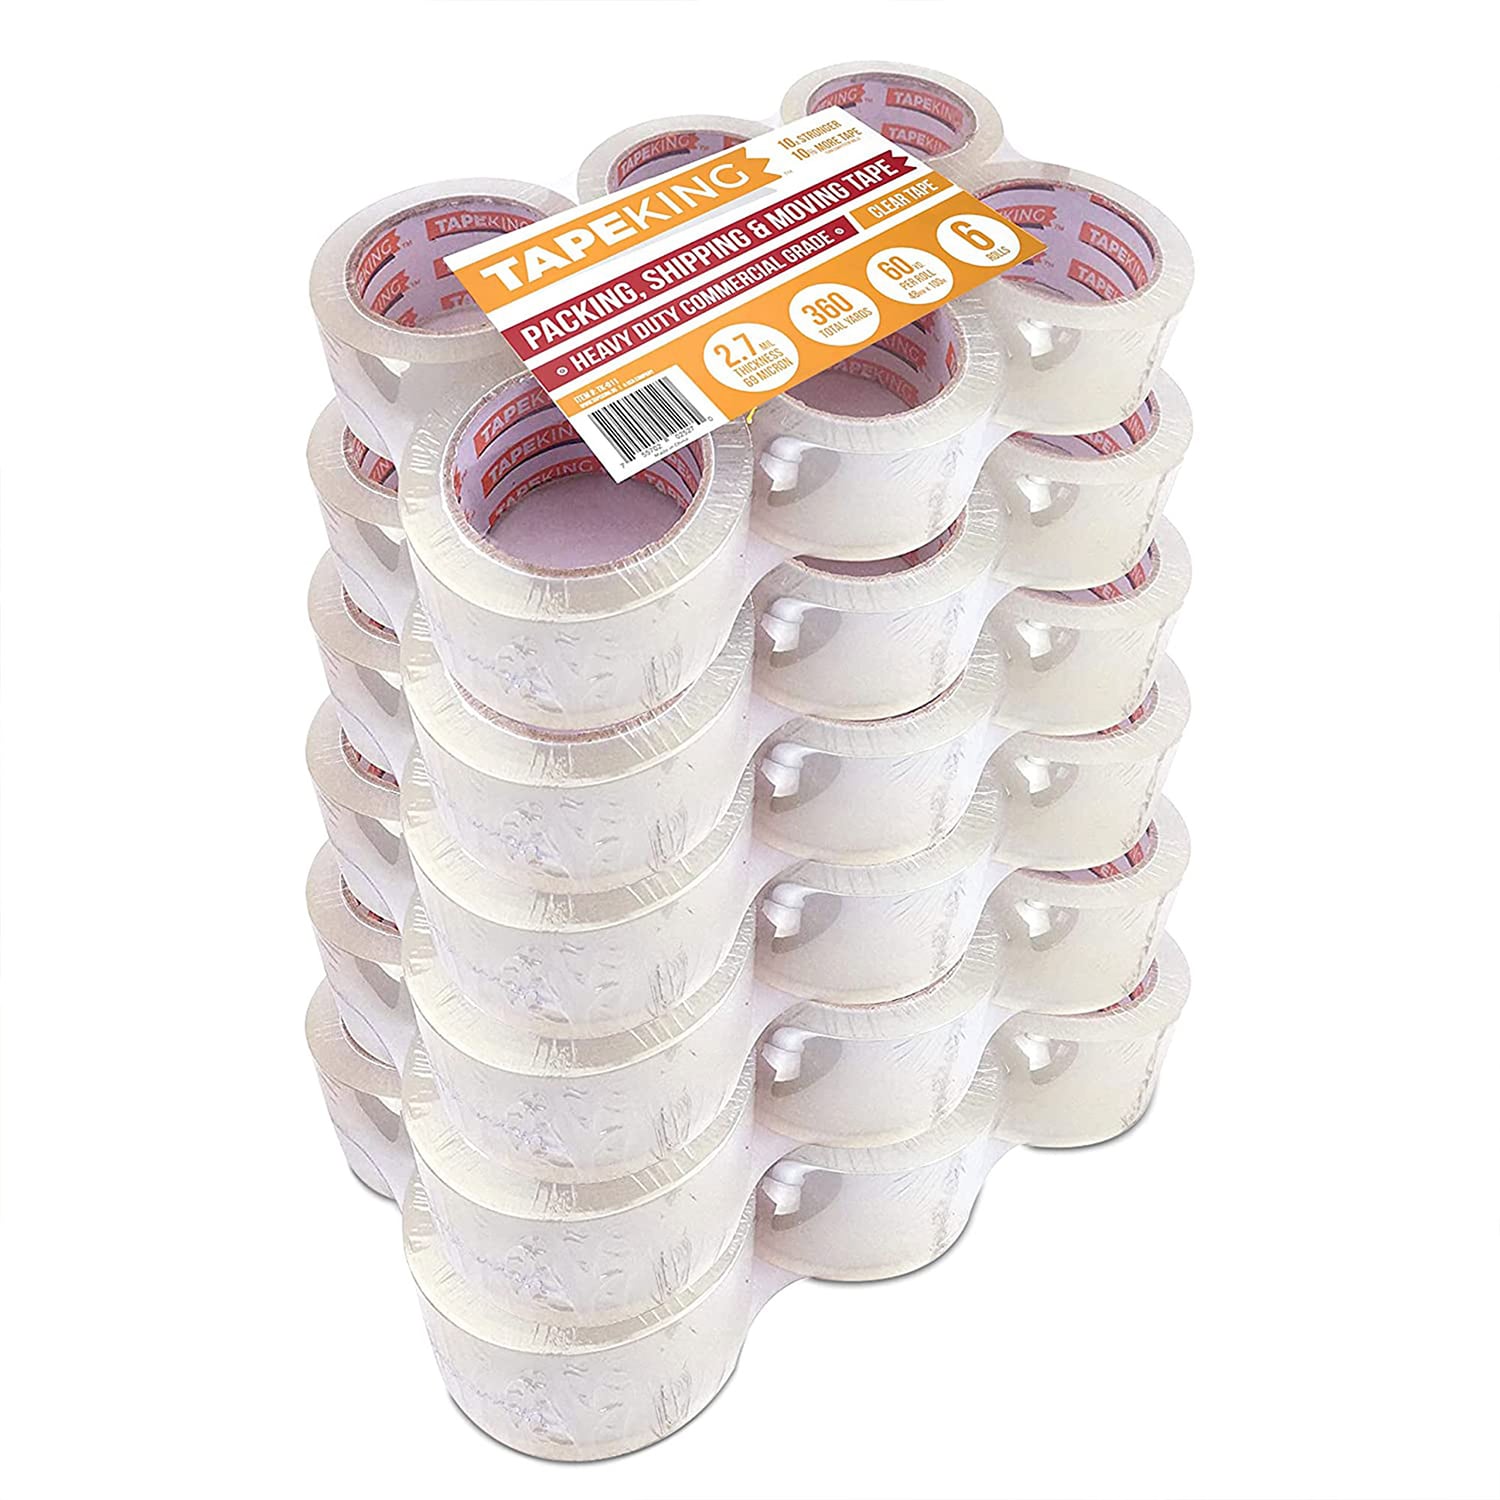  LORESO Packing Tape 36 Rolls - Transparent Heavy Duty Clear  Packing Tape for Packing, Shipping & Moving, 36 Tape Dispenser Refill Rolls,  Thick, Large and Strong Packaging Tape - (2 Inch